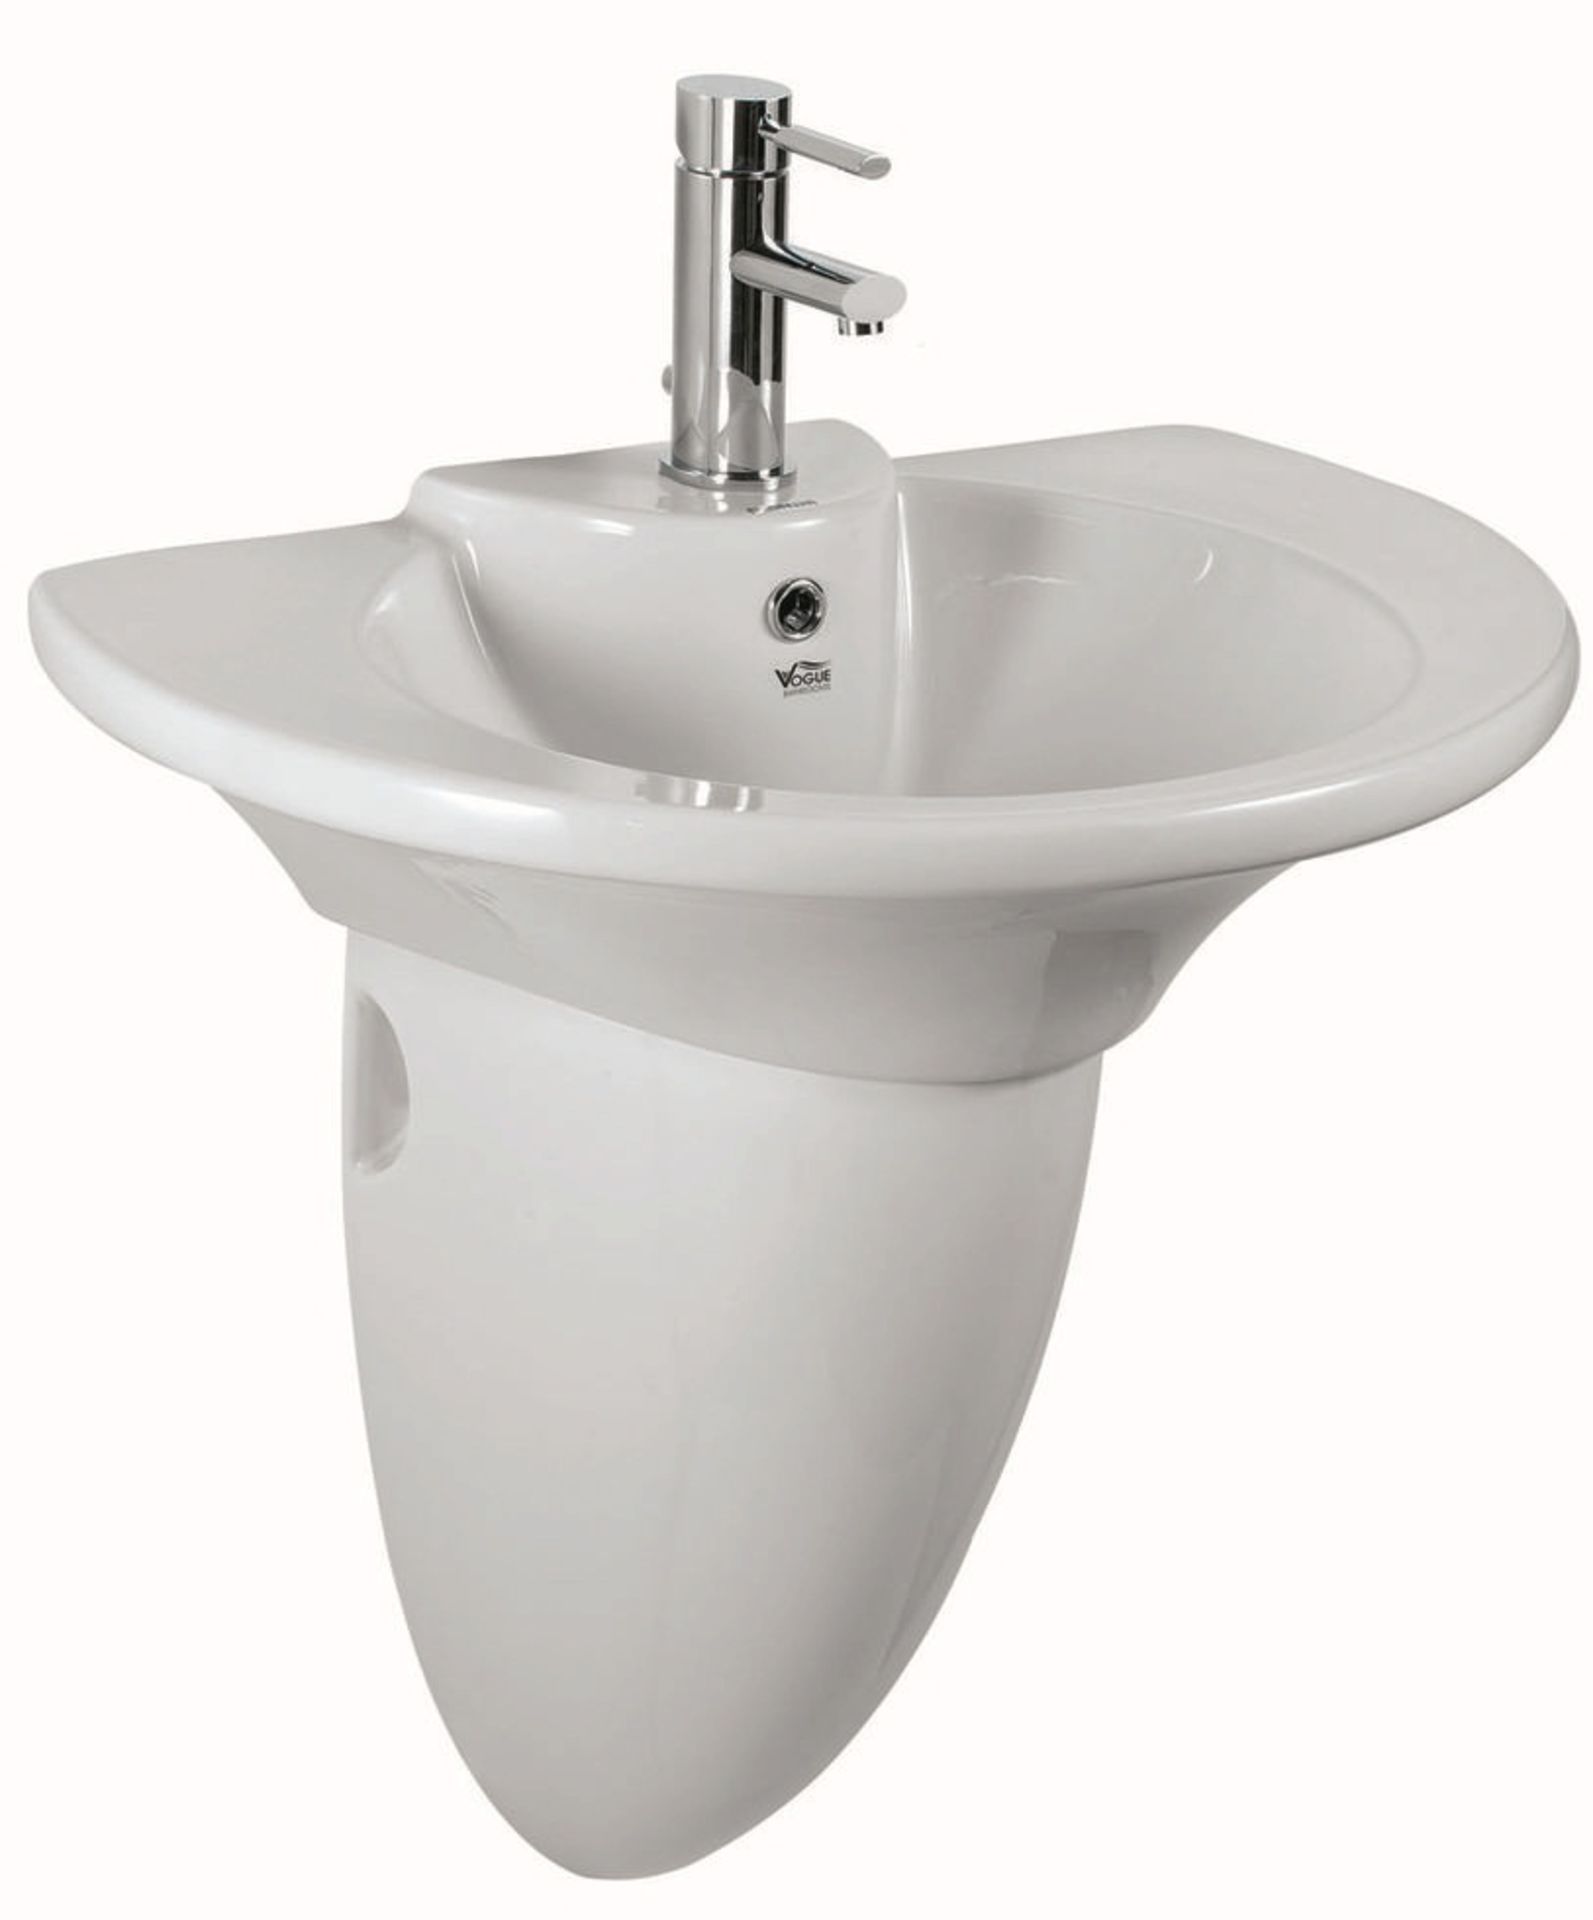 1 x Vogue Bathrooms TARIFA Single Tap Hole SINK BASIN and Pedestal - 630mm Width - Brand New and